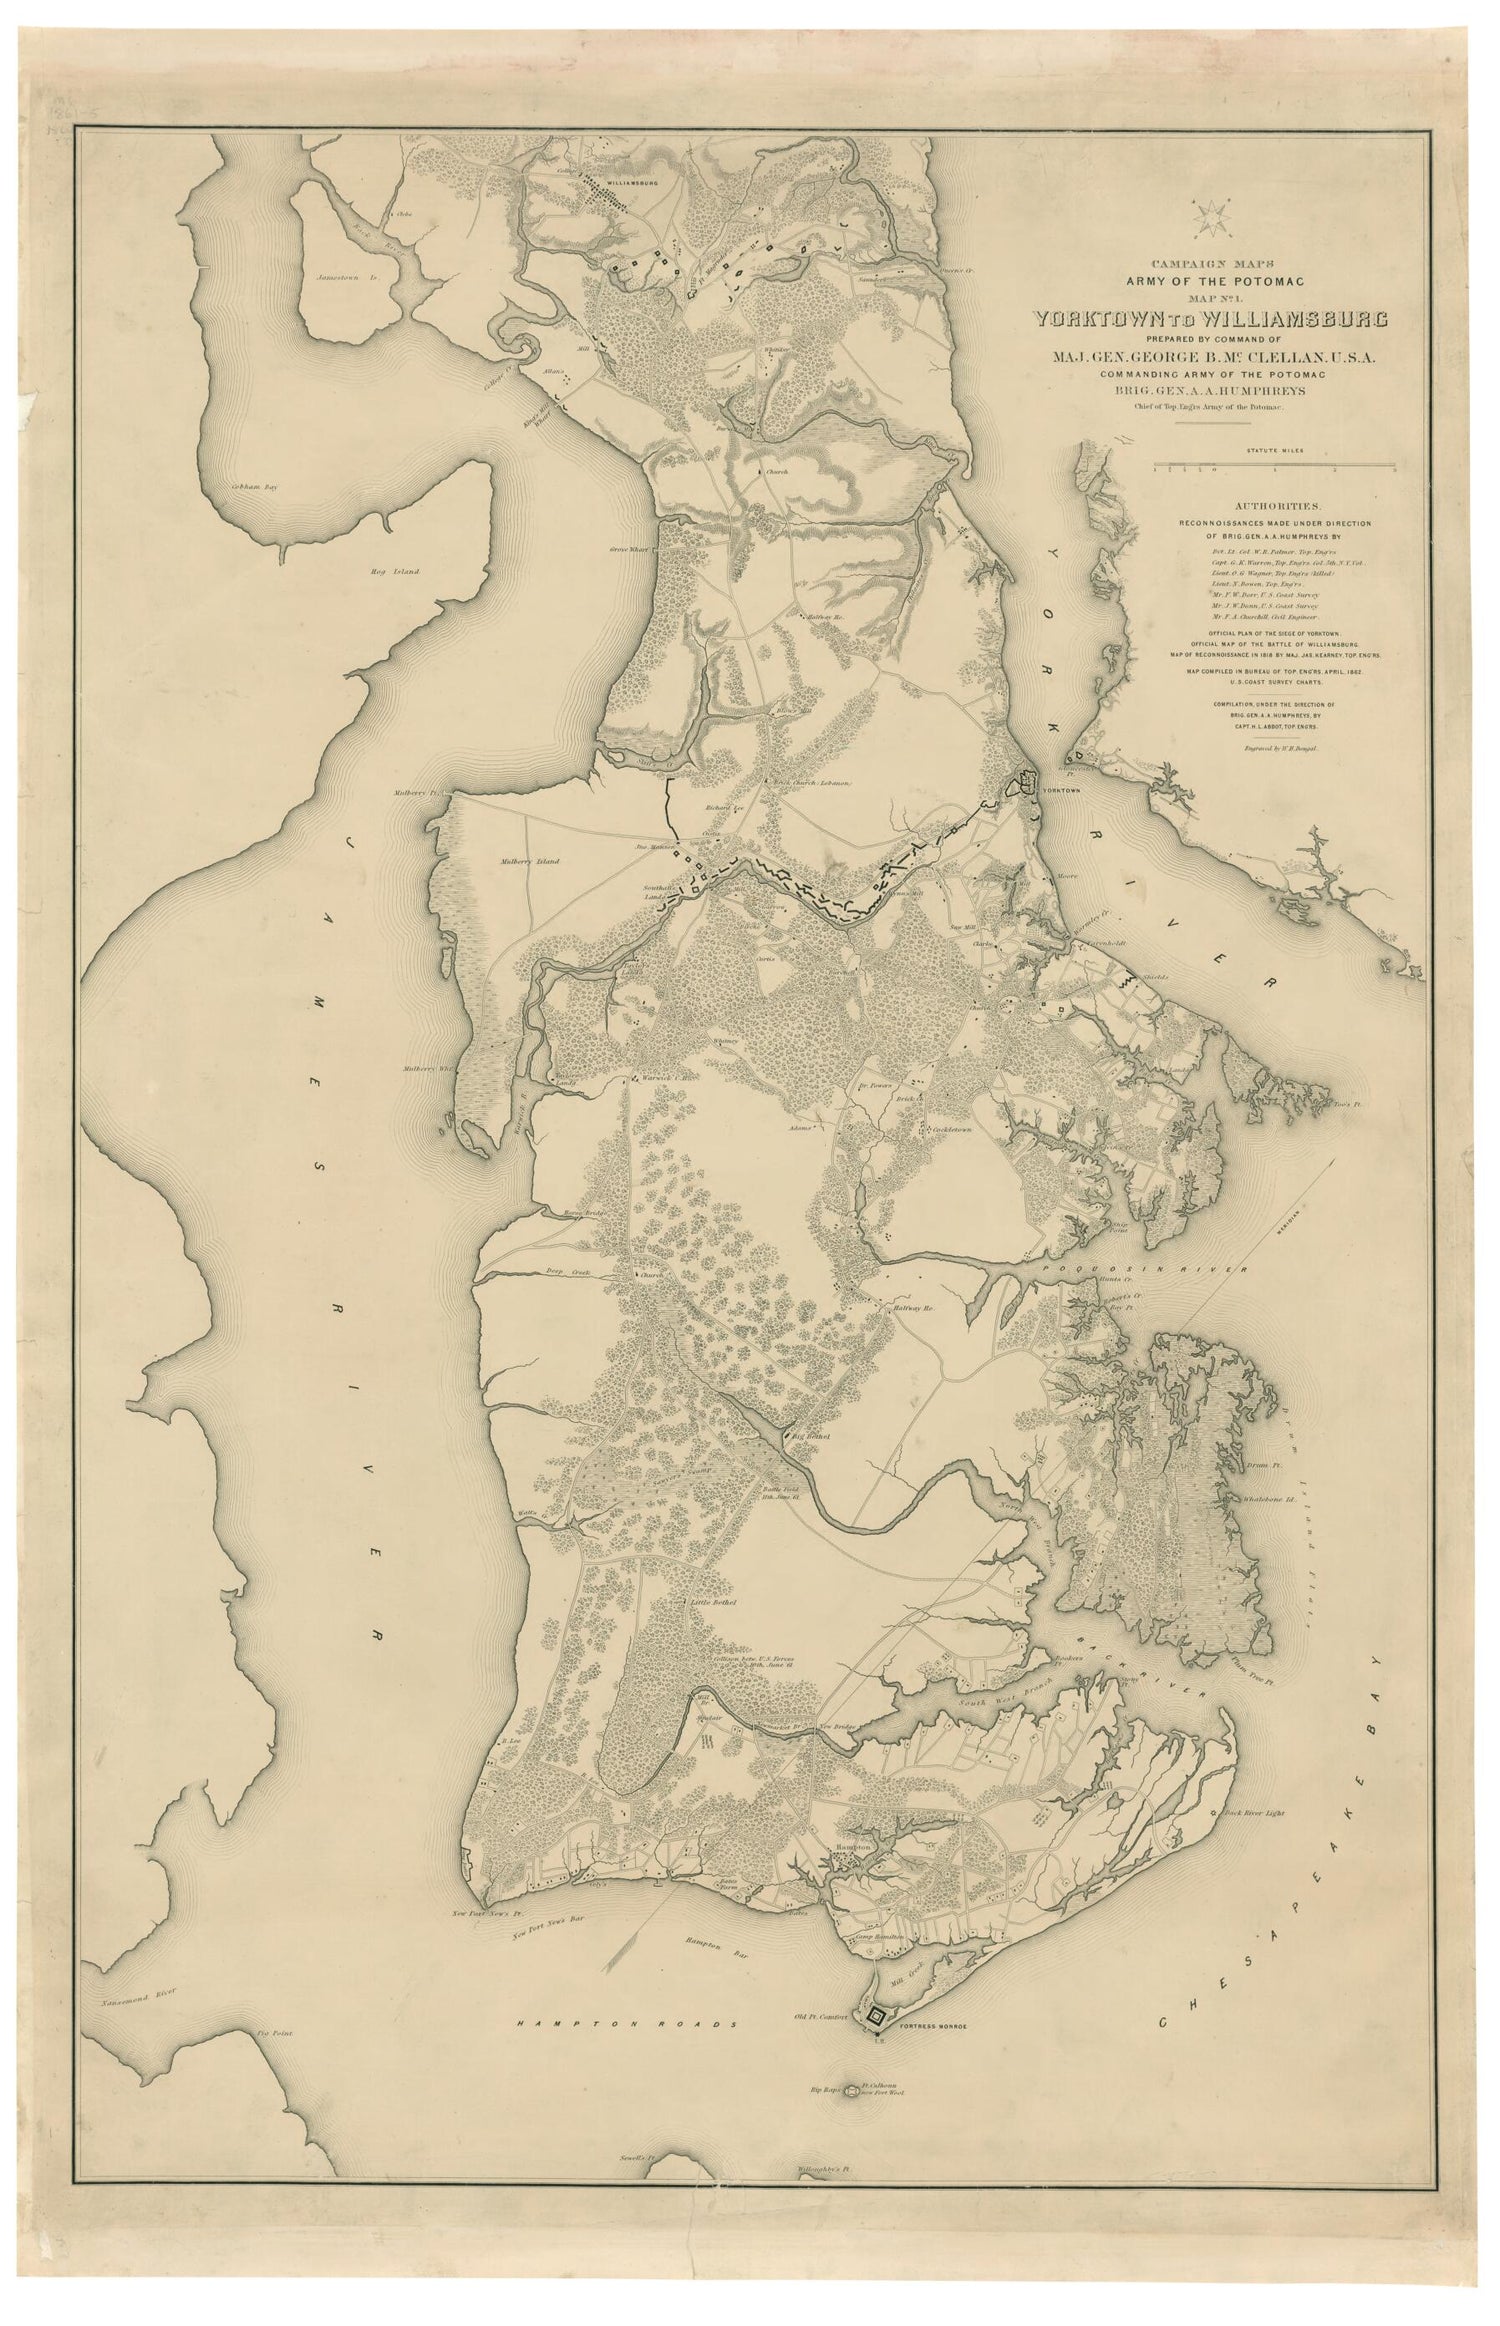 This old map of Yorktown to Williamsburg (Campaign Map, Army of the Potomac, Map No. 1) from 1862 was created by Henry L. Abbot, William H. Dougal,  United States. Army of the Potomac. Engineer Dept in 1862